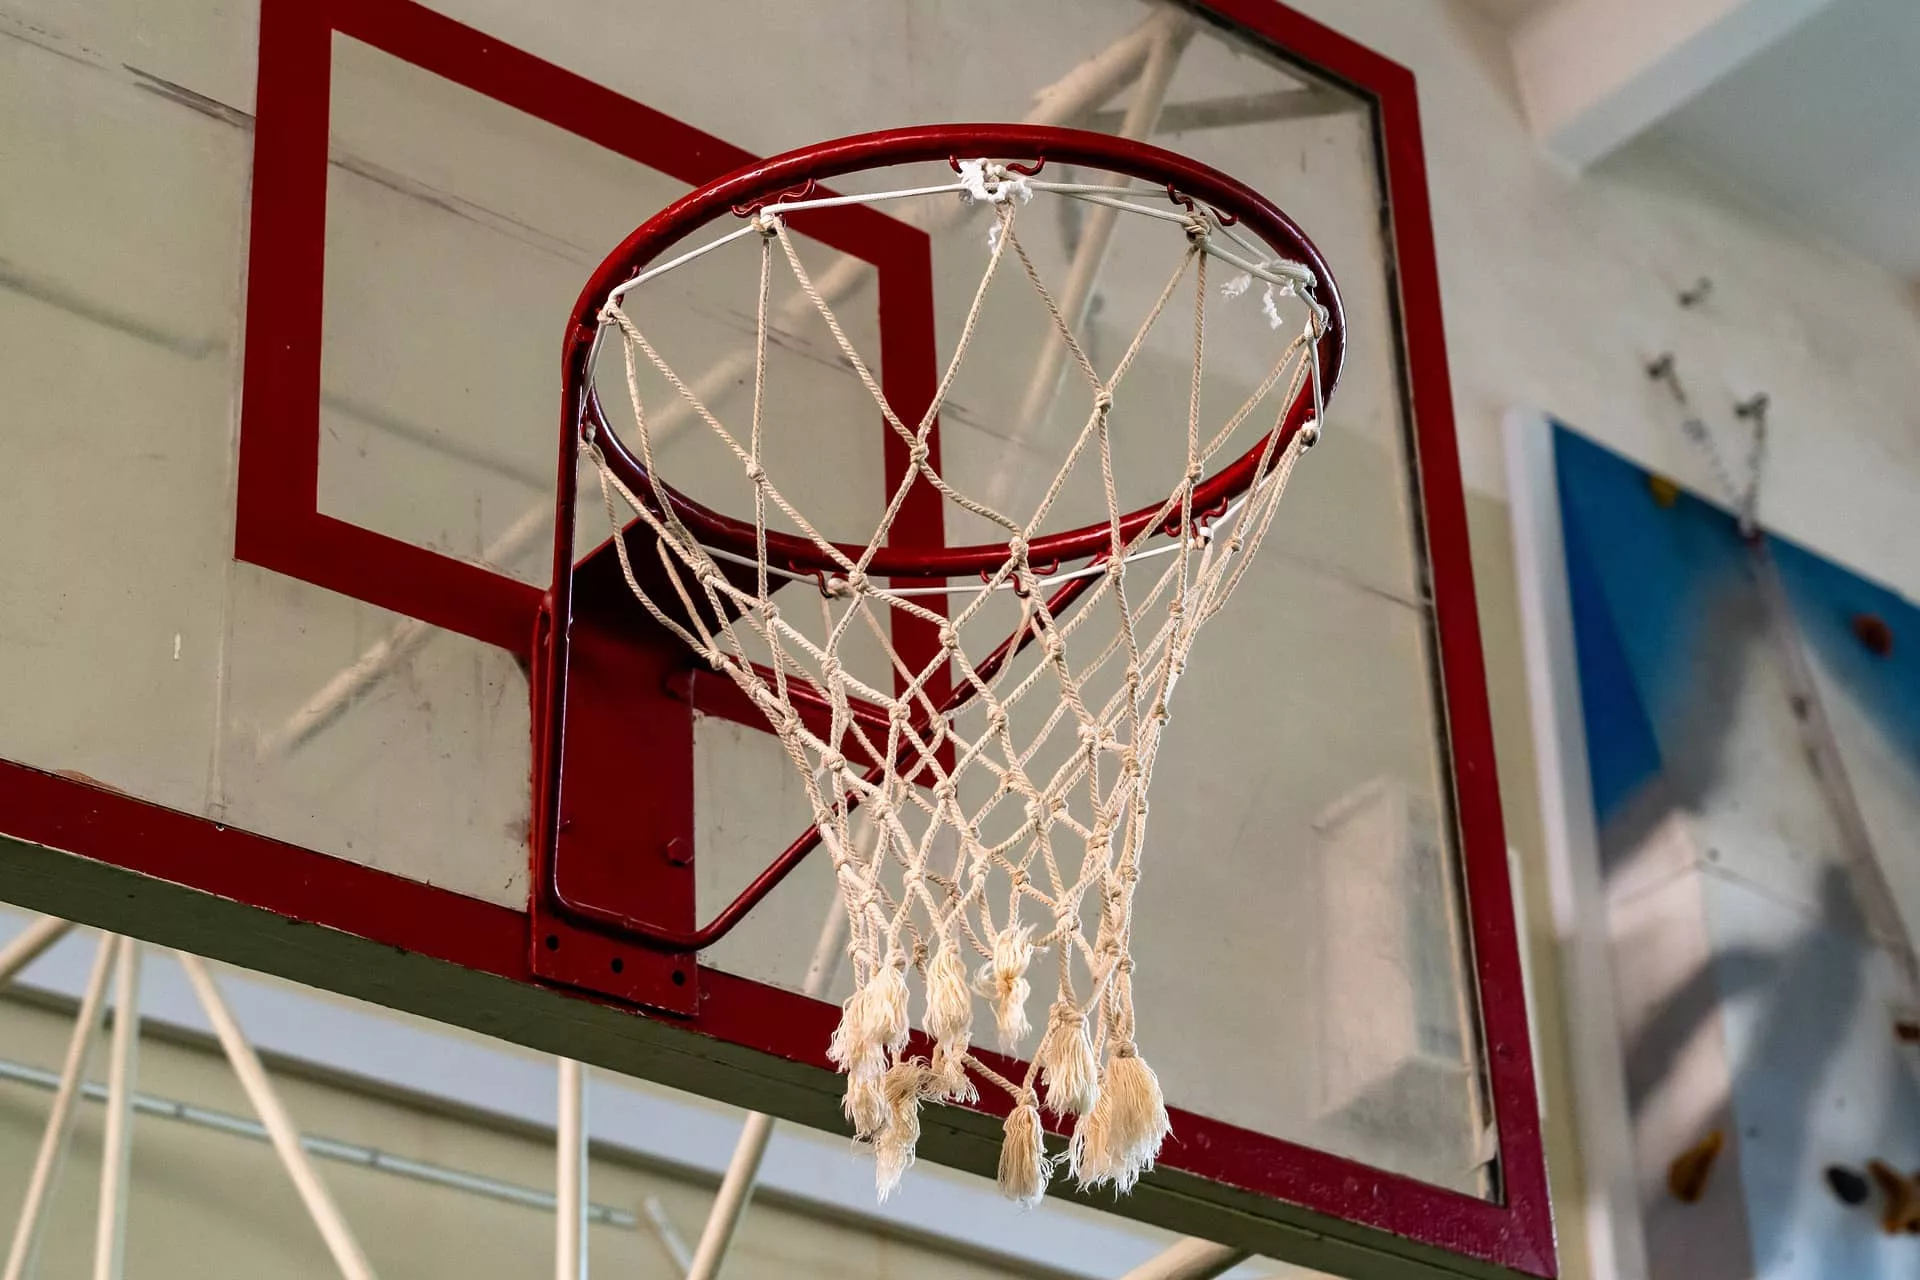 basketball-hoop-5086123_1920-image-by-alexei-chizhov-from-pixabay-jpg